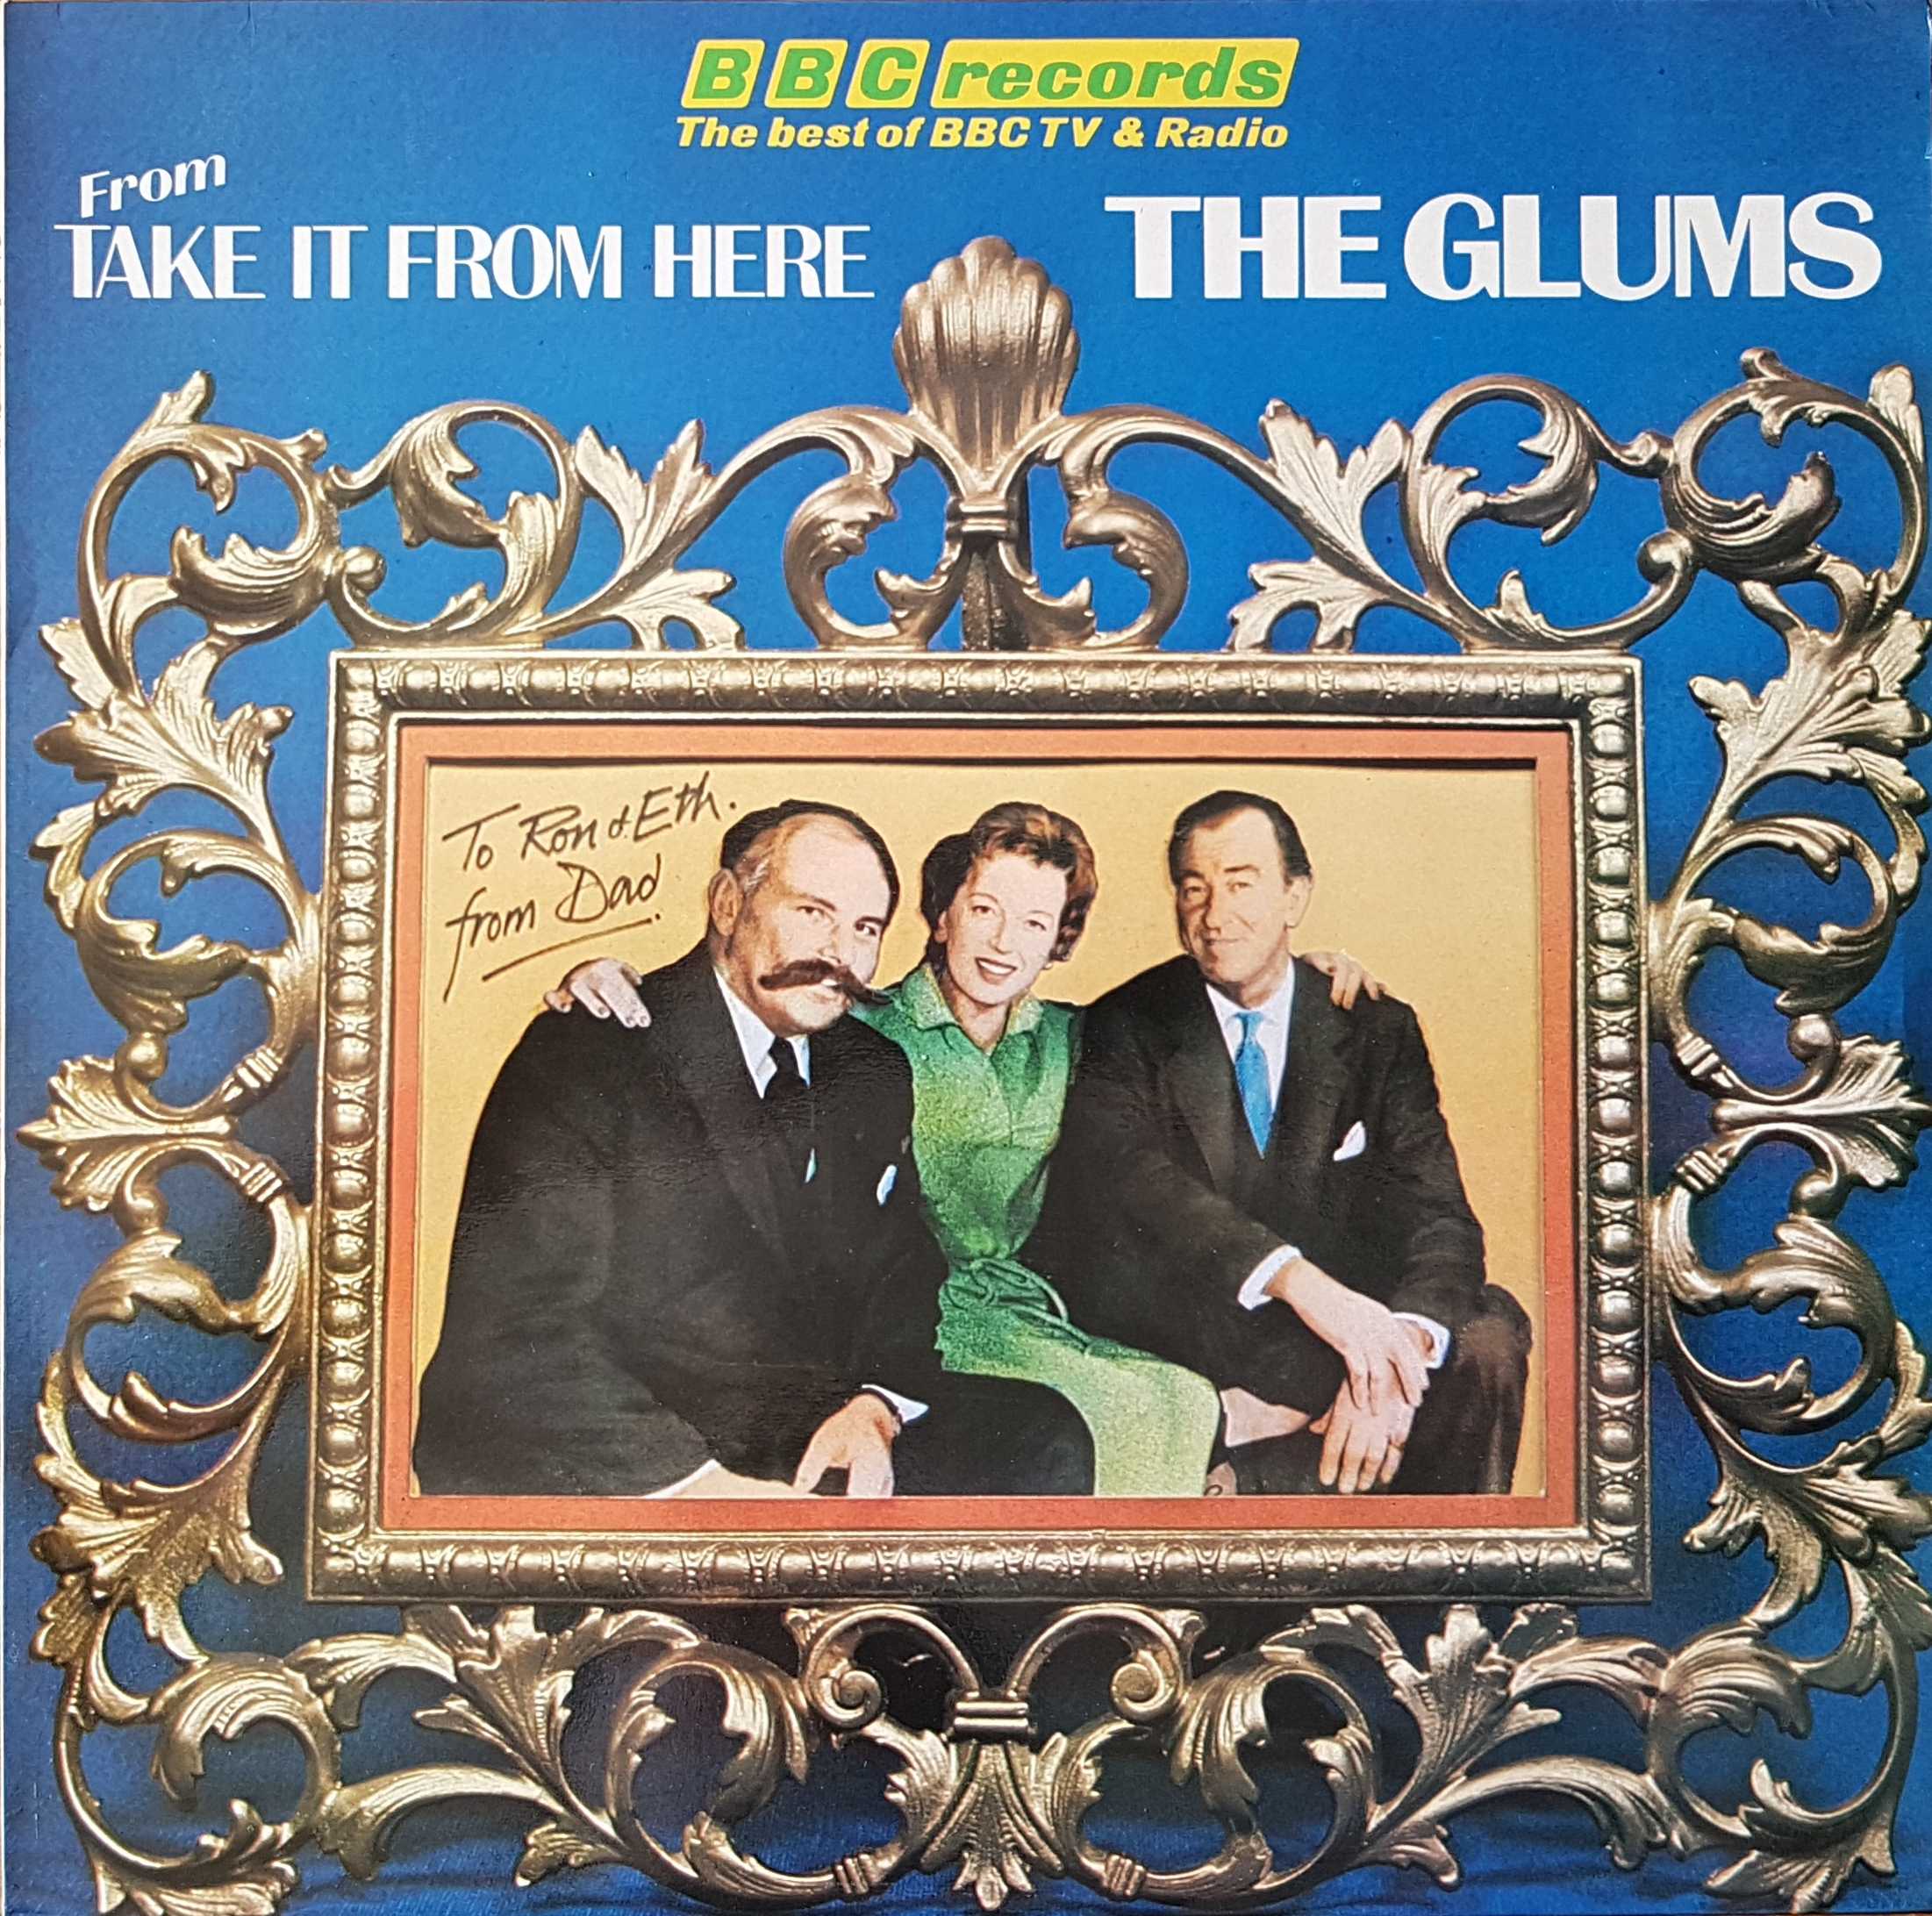 Picture of REH 161 The Glums (Take it from here) by artist Frank Muir / Denis Norden from the BBC albums - Records and Tapes library